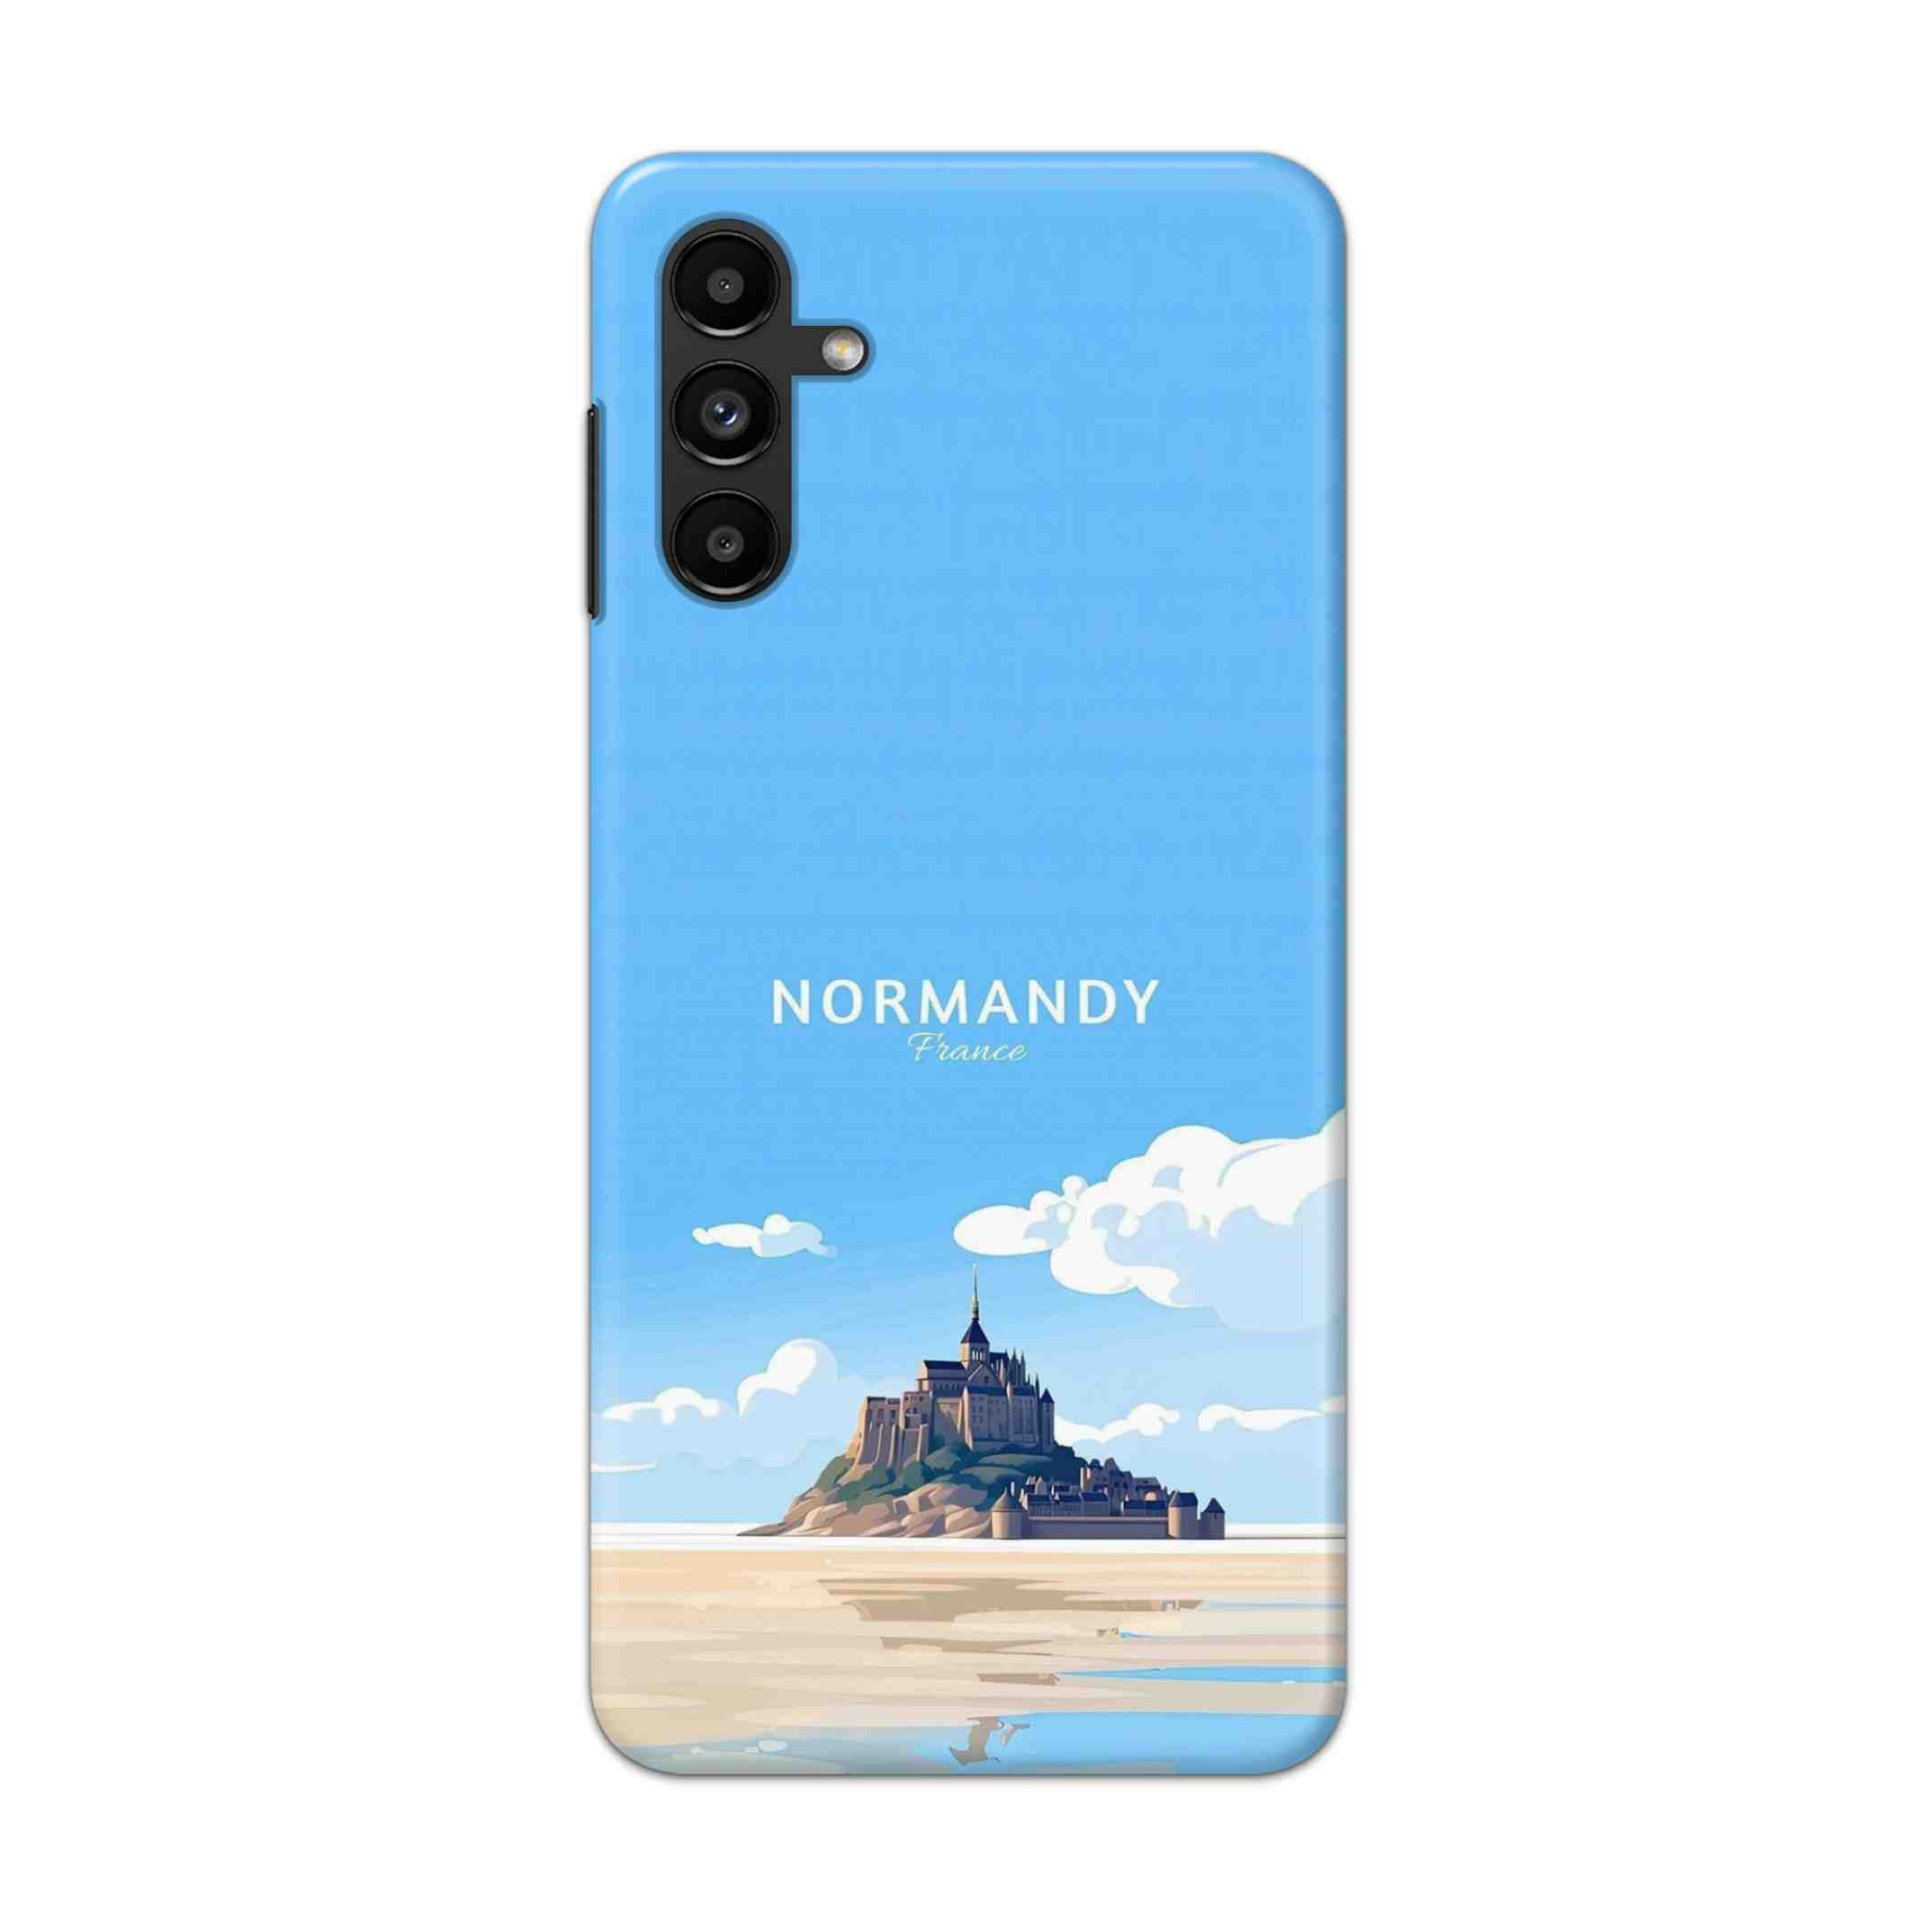 Buy Normandy Hard Back Mobile Phone Case/Cover For Galaxy A13 (5G) Online